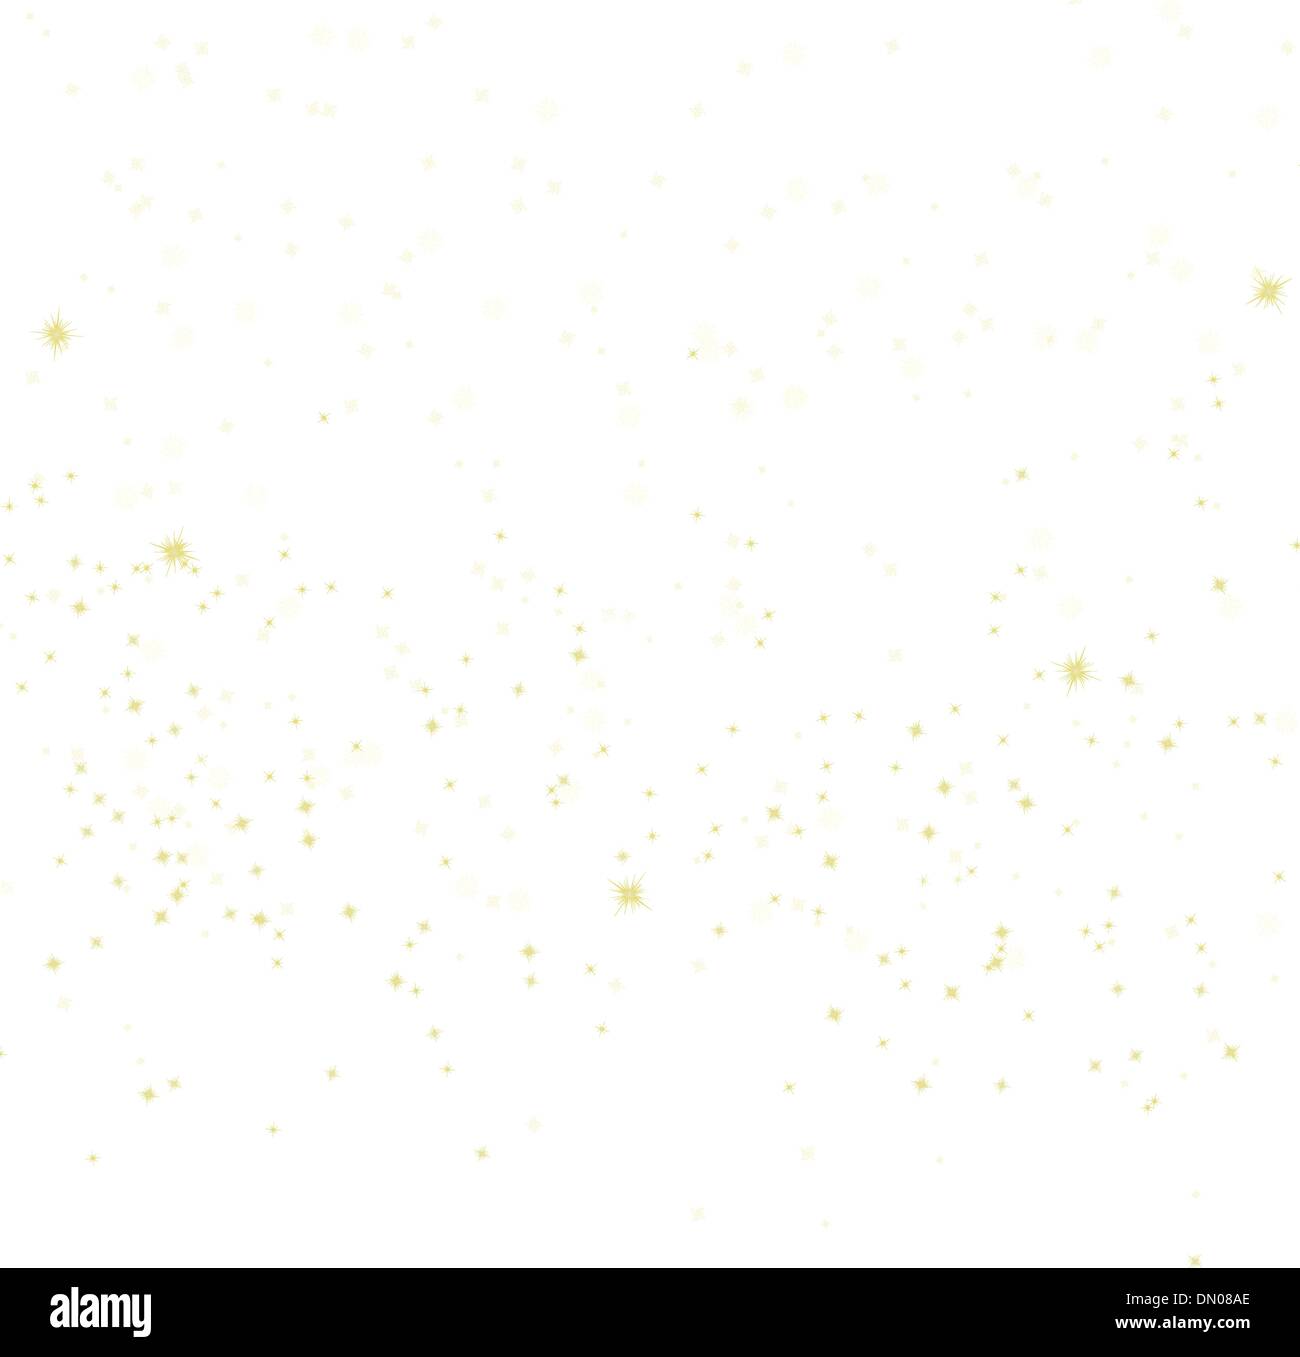 Snowflakes and stars on golden light. EPS 8 Stock Vector